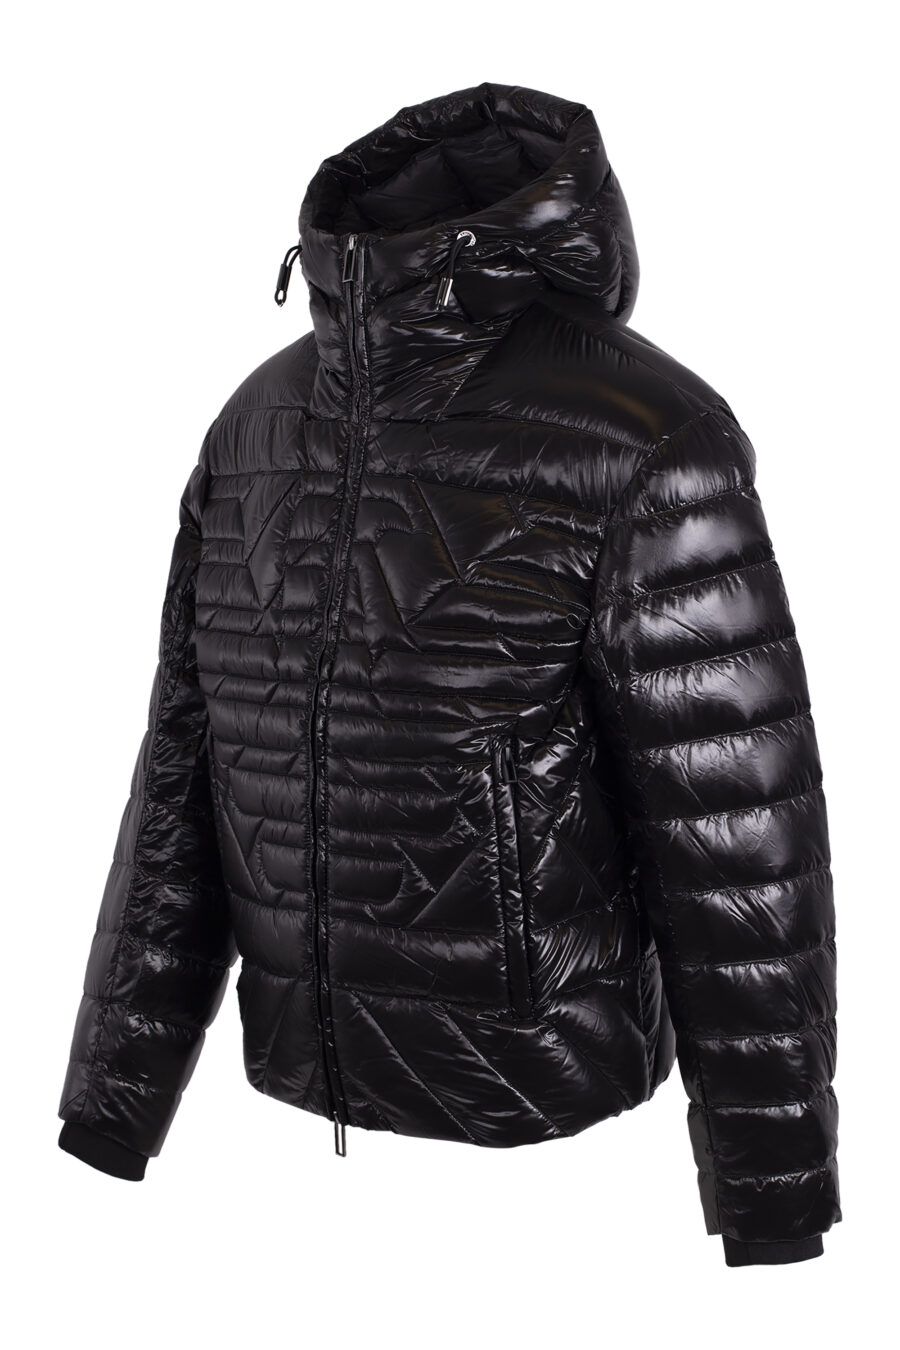 Black hooded quilted jacket with eagle logo - IMG 4681